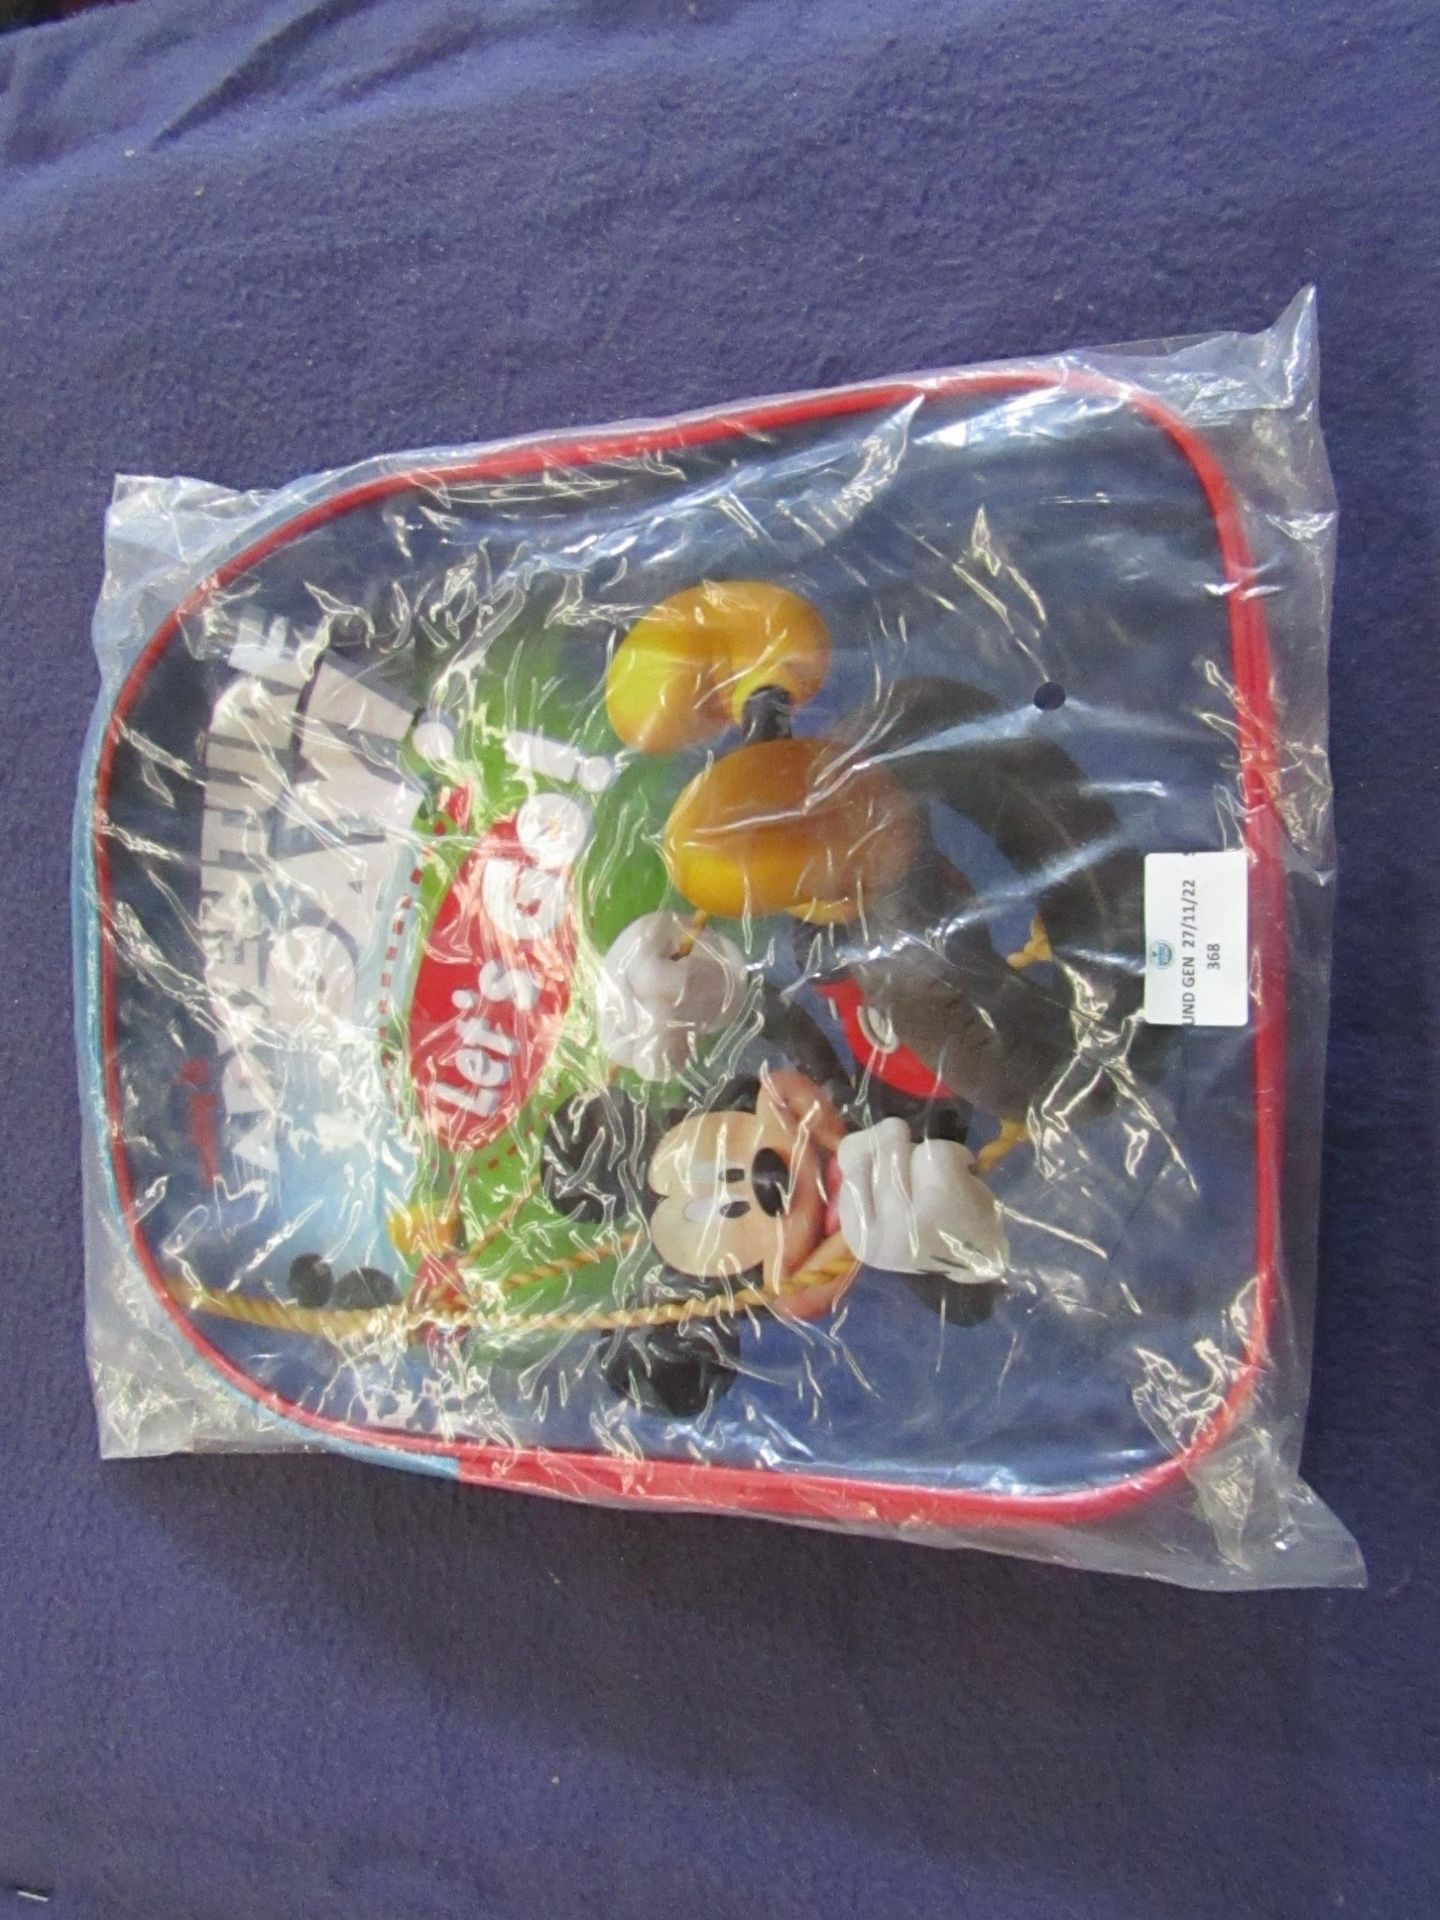 Mickey Mouse - Backppack - Unused & Packaged.